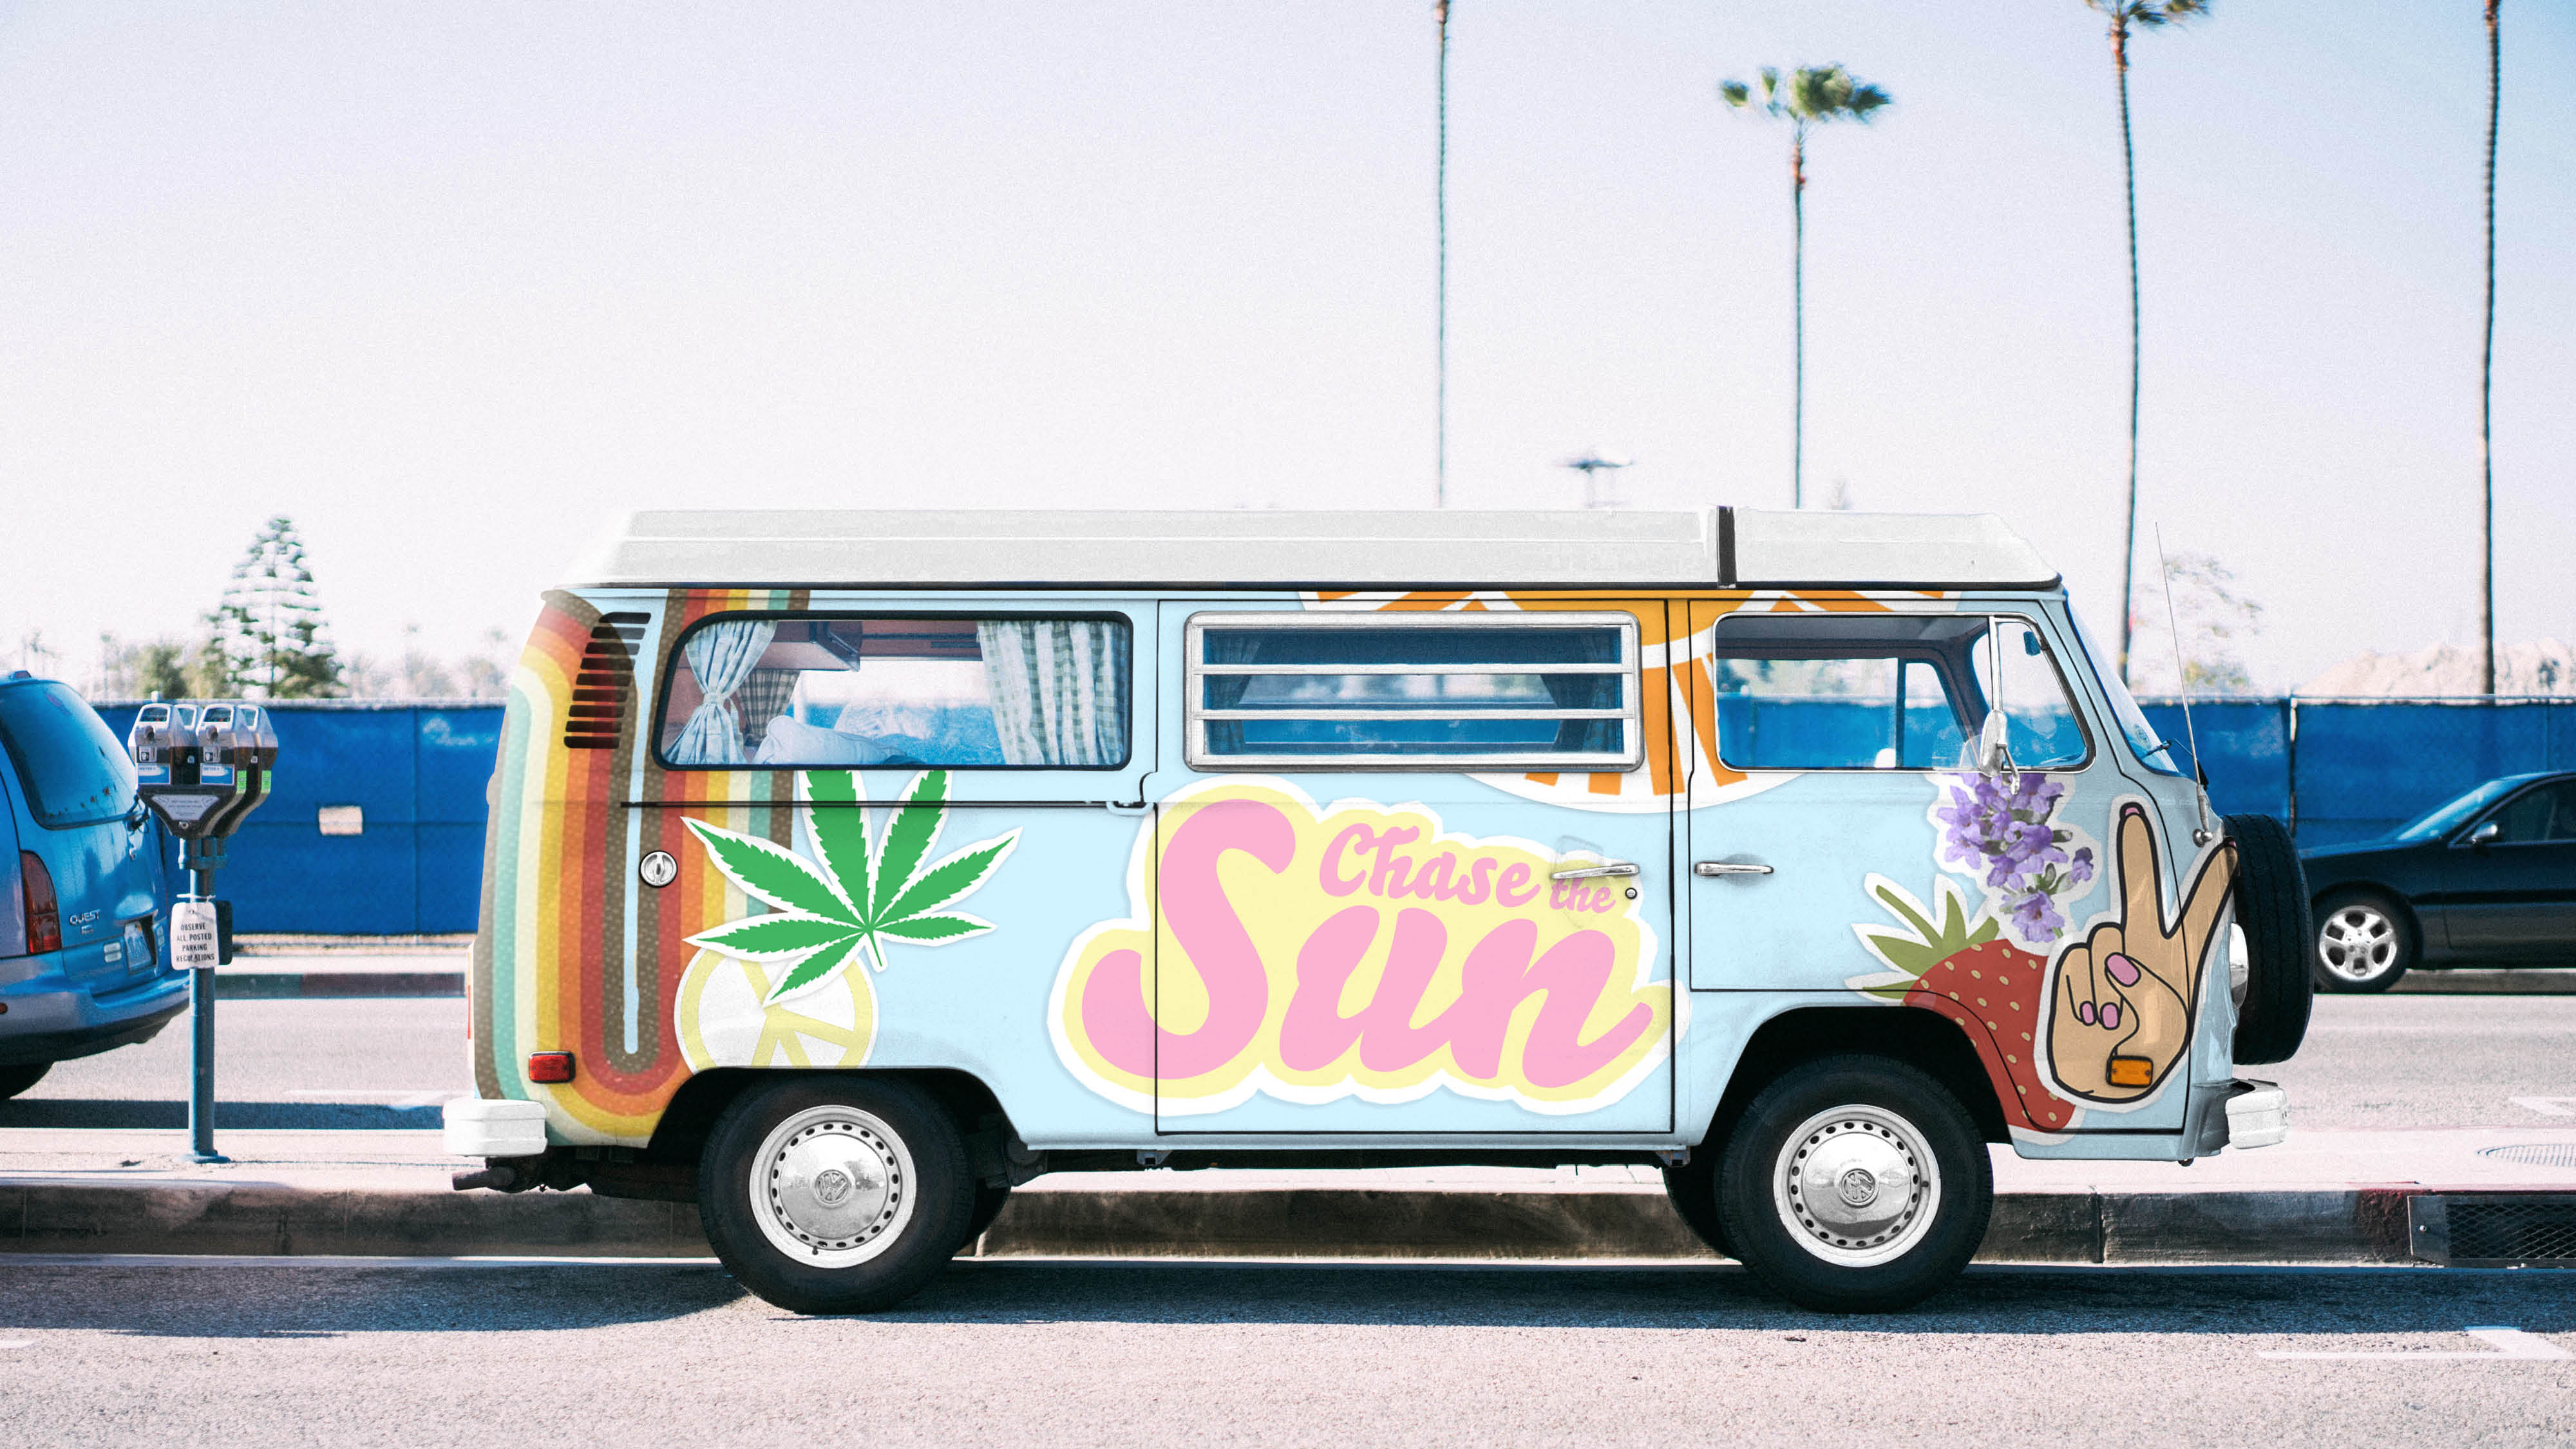 BA Graphic Designers work by Amber Mills-Rist showing the chase the sun campervan advertisement.